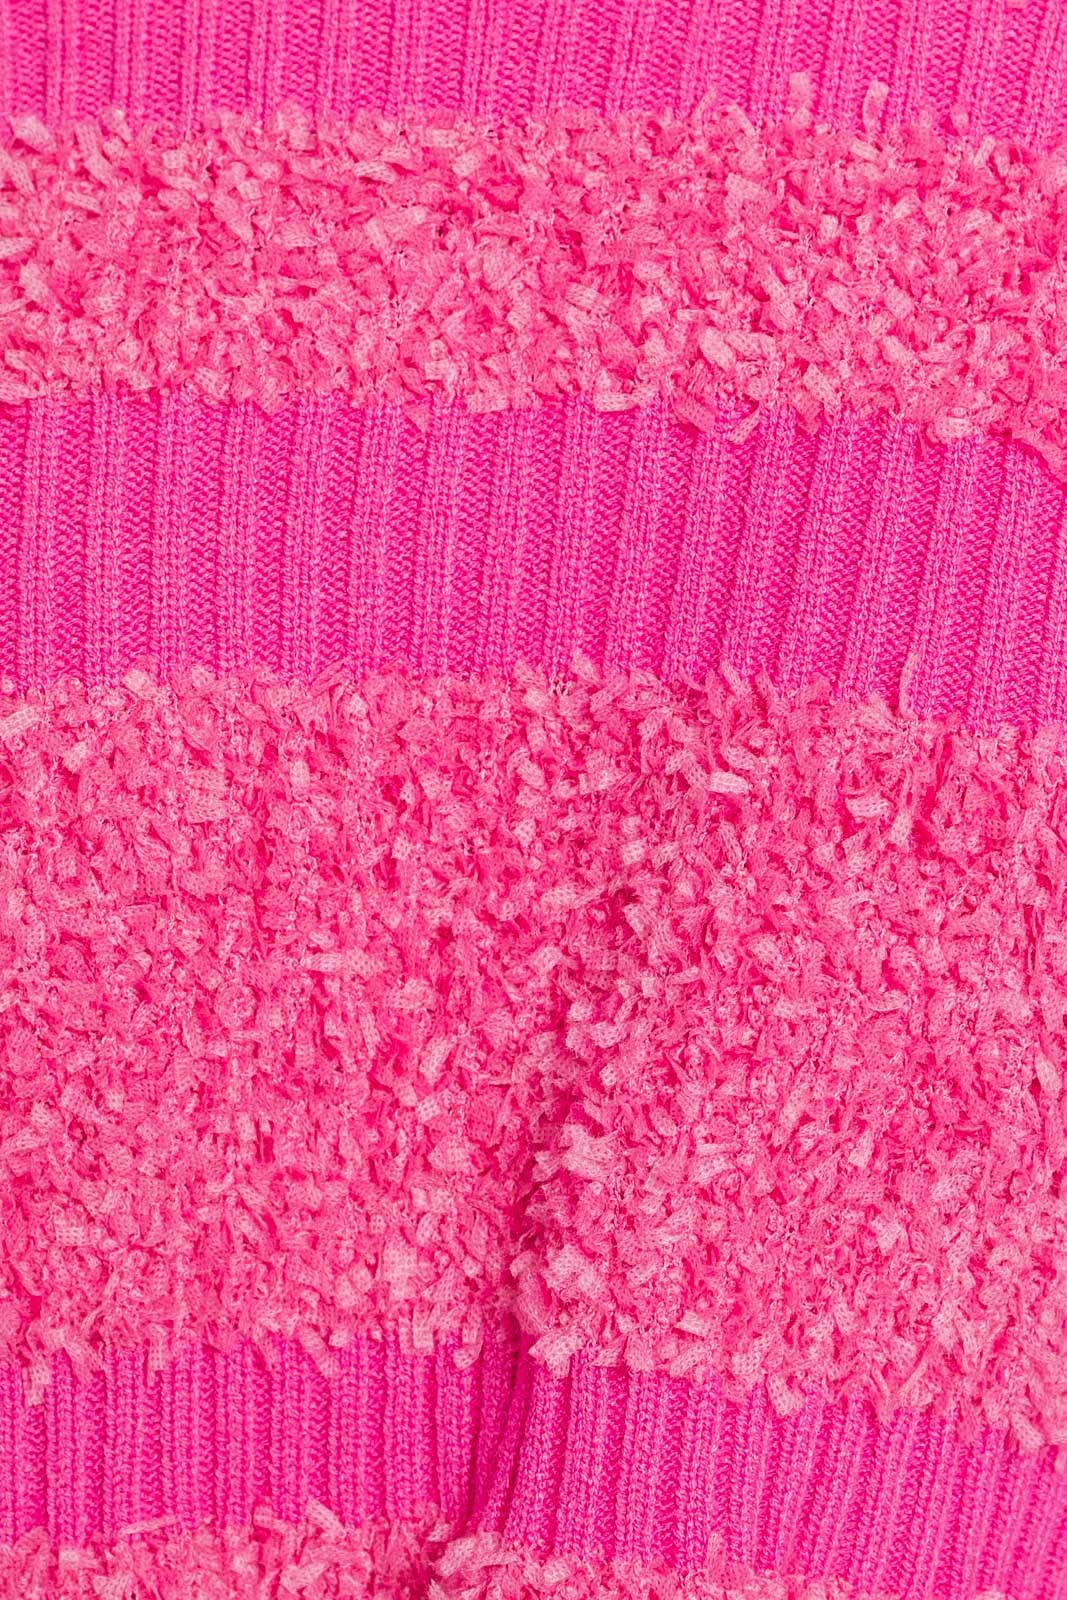 Le Lis | Pink Textured Stripe Sweater | Sweetest Stitch Online Store